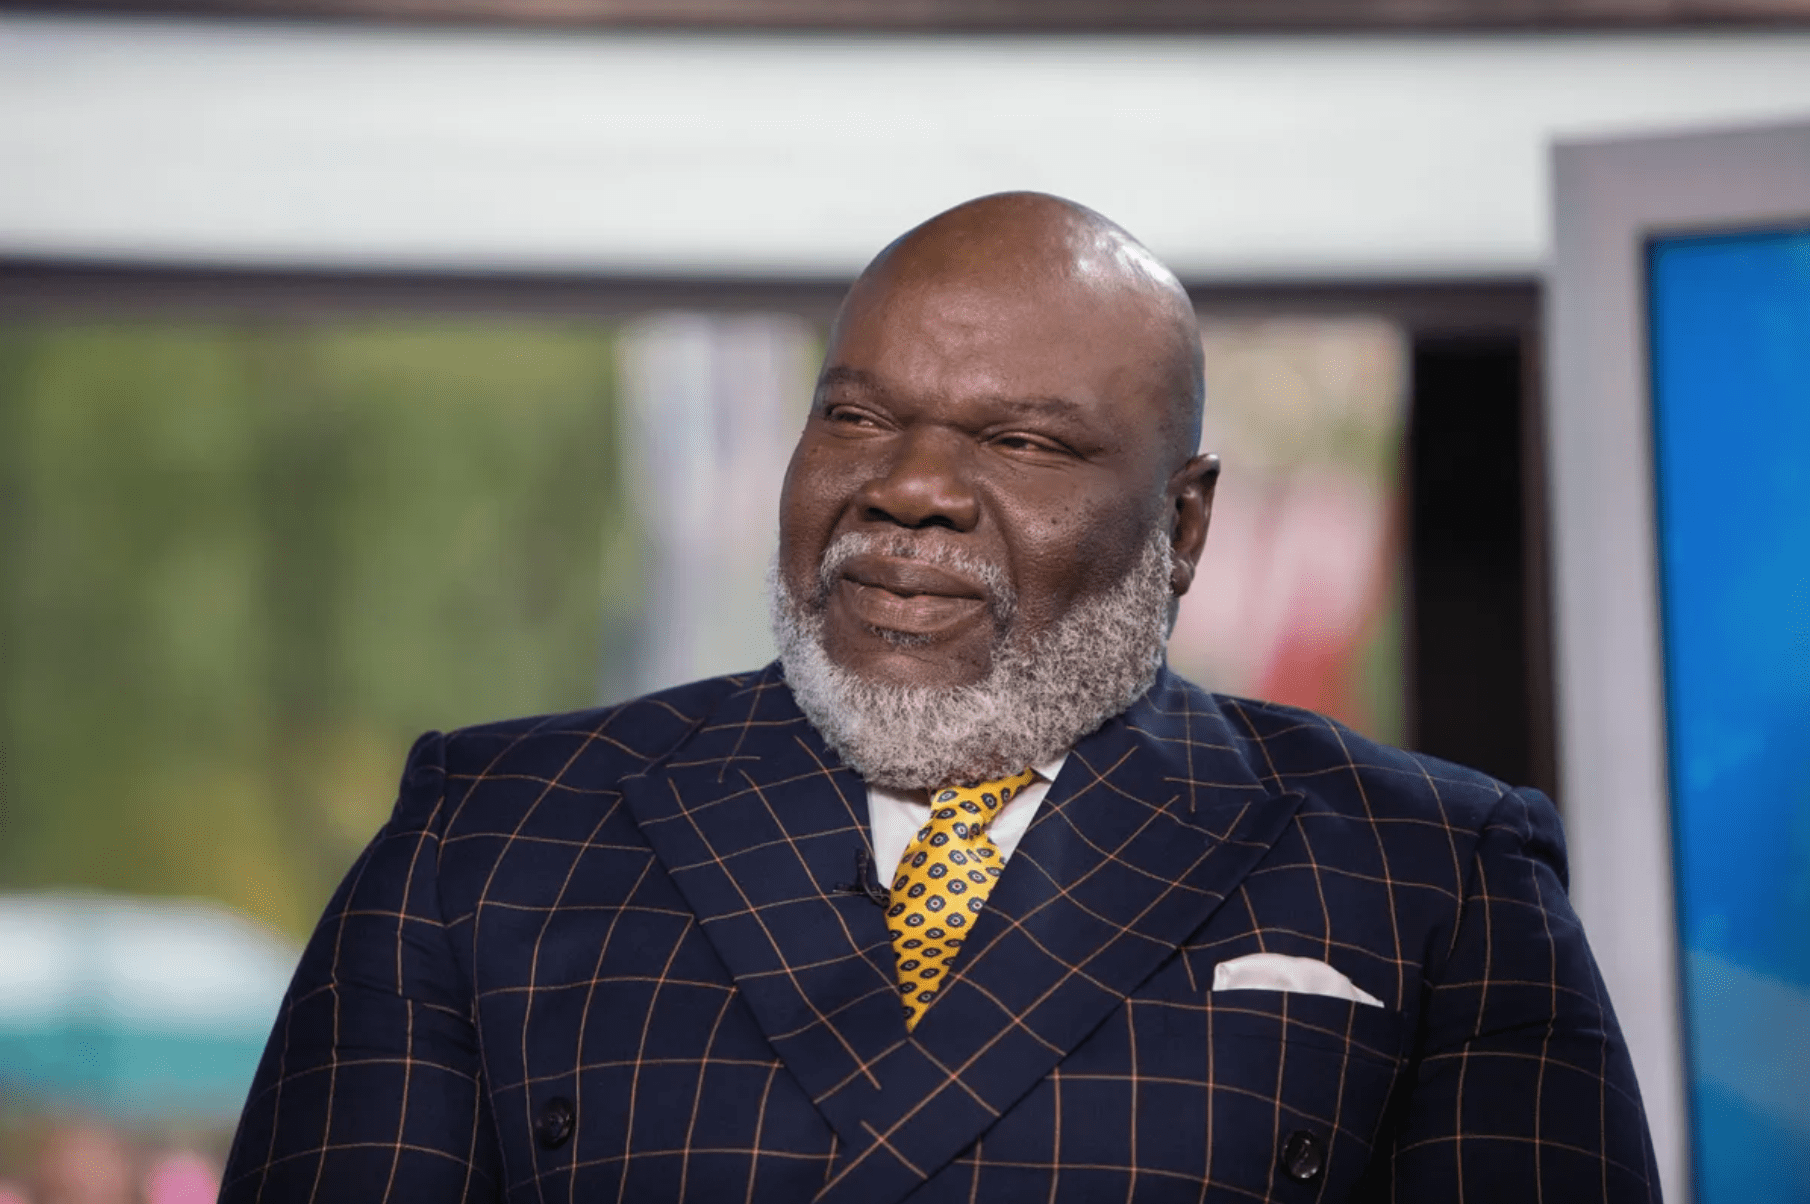 Bishop T.D. Jakes speaks in a television interview on October 9, 2017 at the NBCUniversal Network. | Source: Getty Images